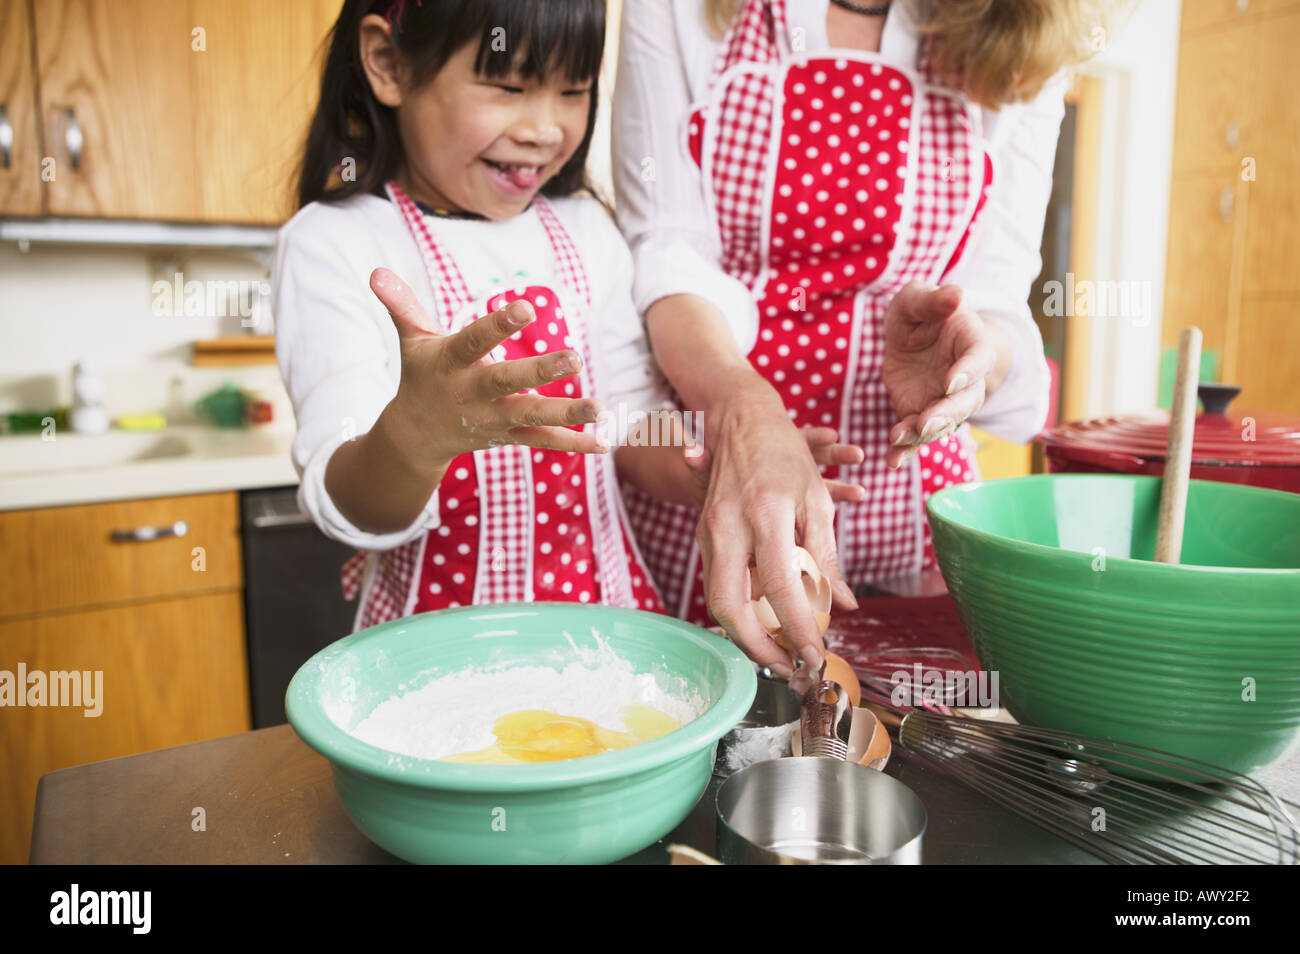 A female adult and child cooking together Stock Photo